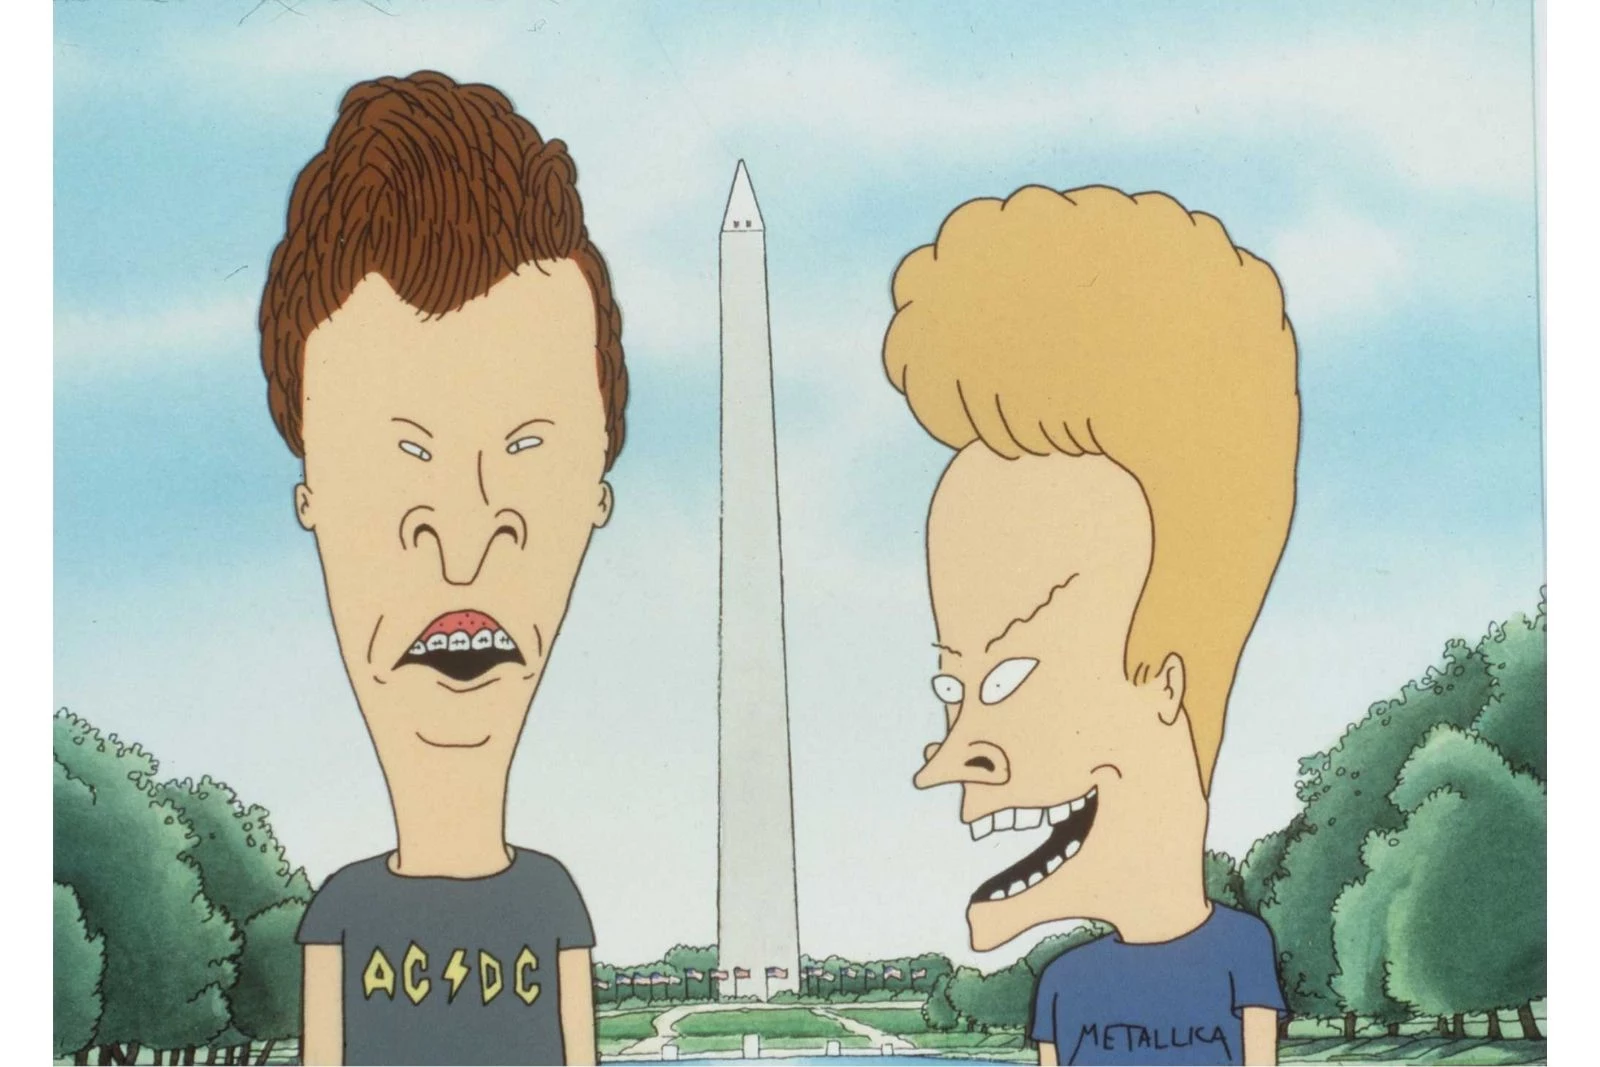 download new beavis and buttheads 2021